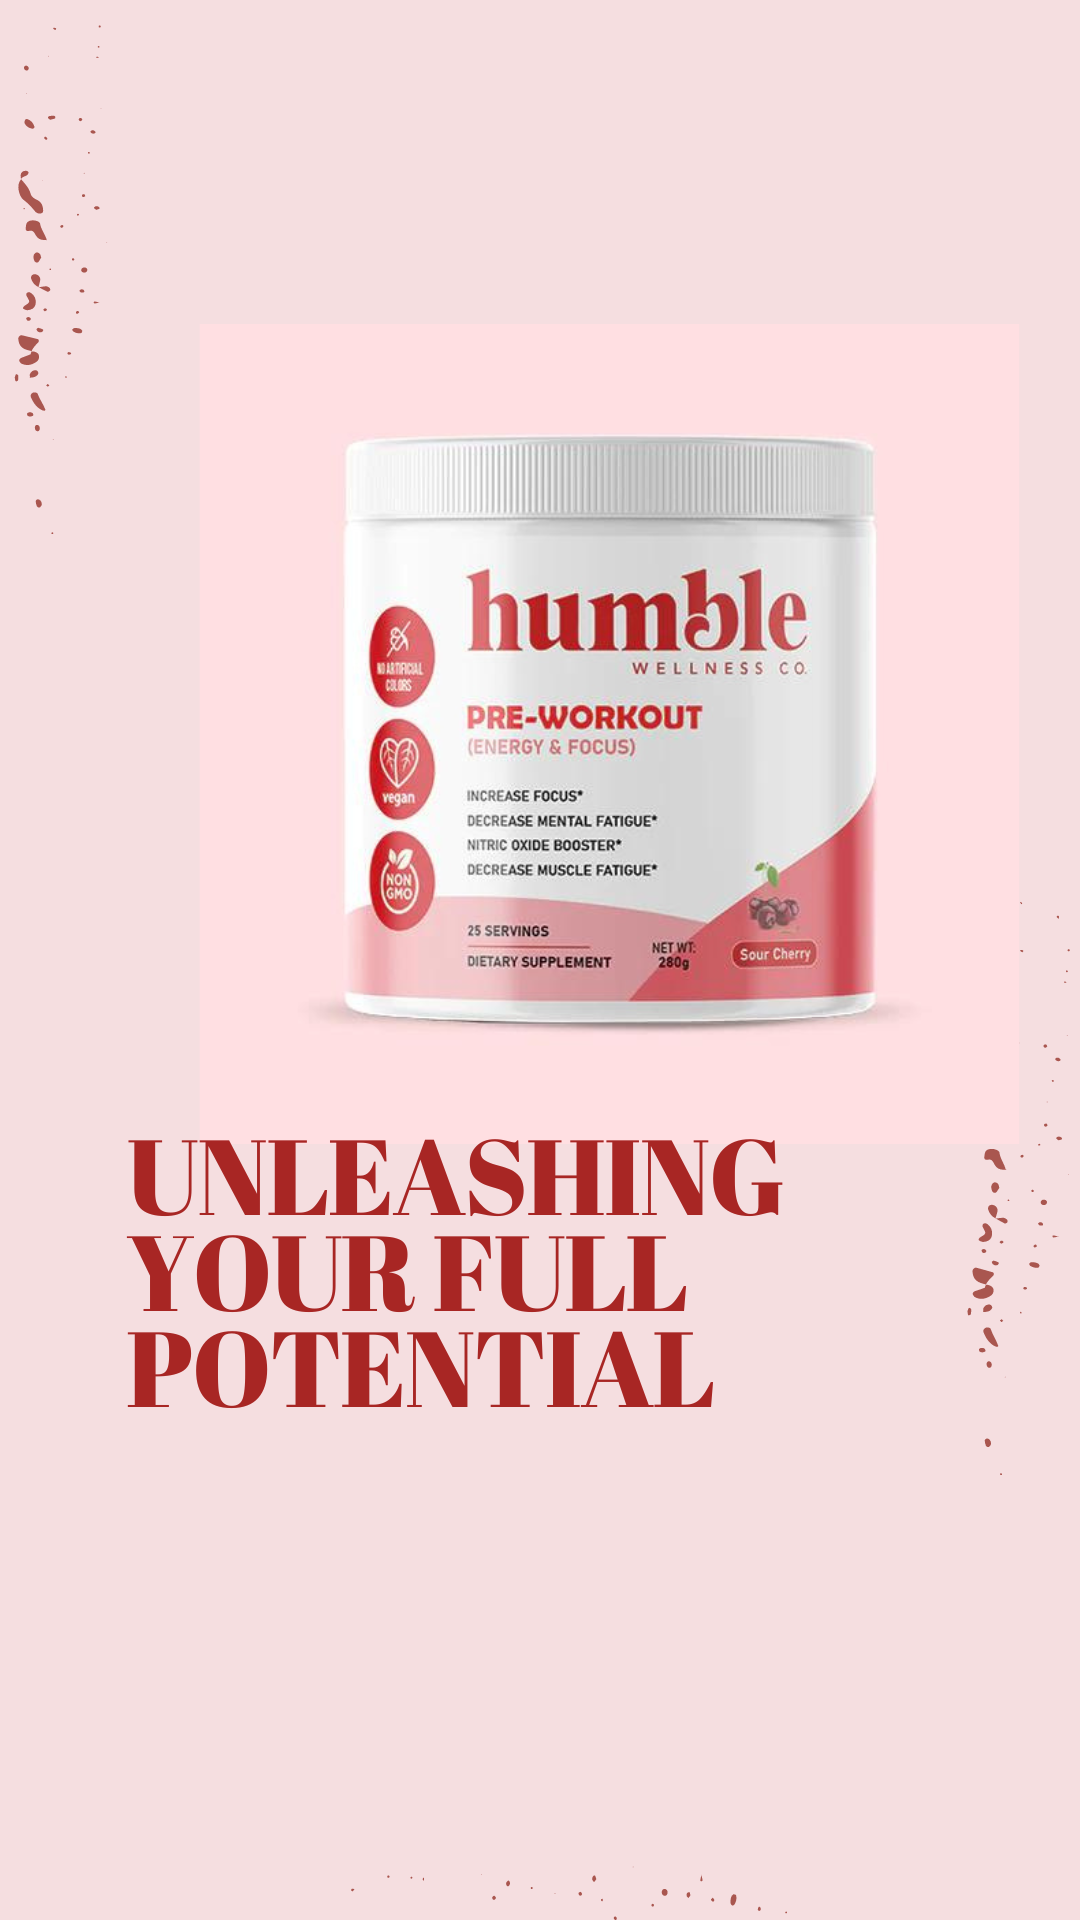 Unleashing Your Full Potential: The Comprehensive Benefits of Humble Wellness Pre-Workout